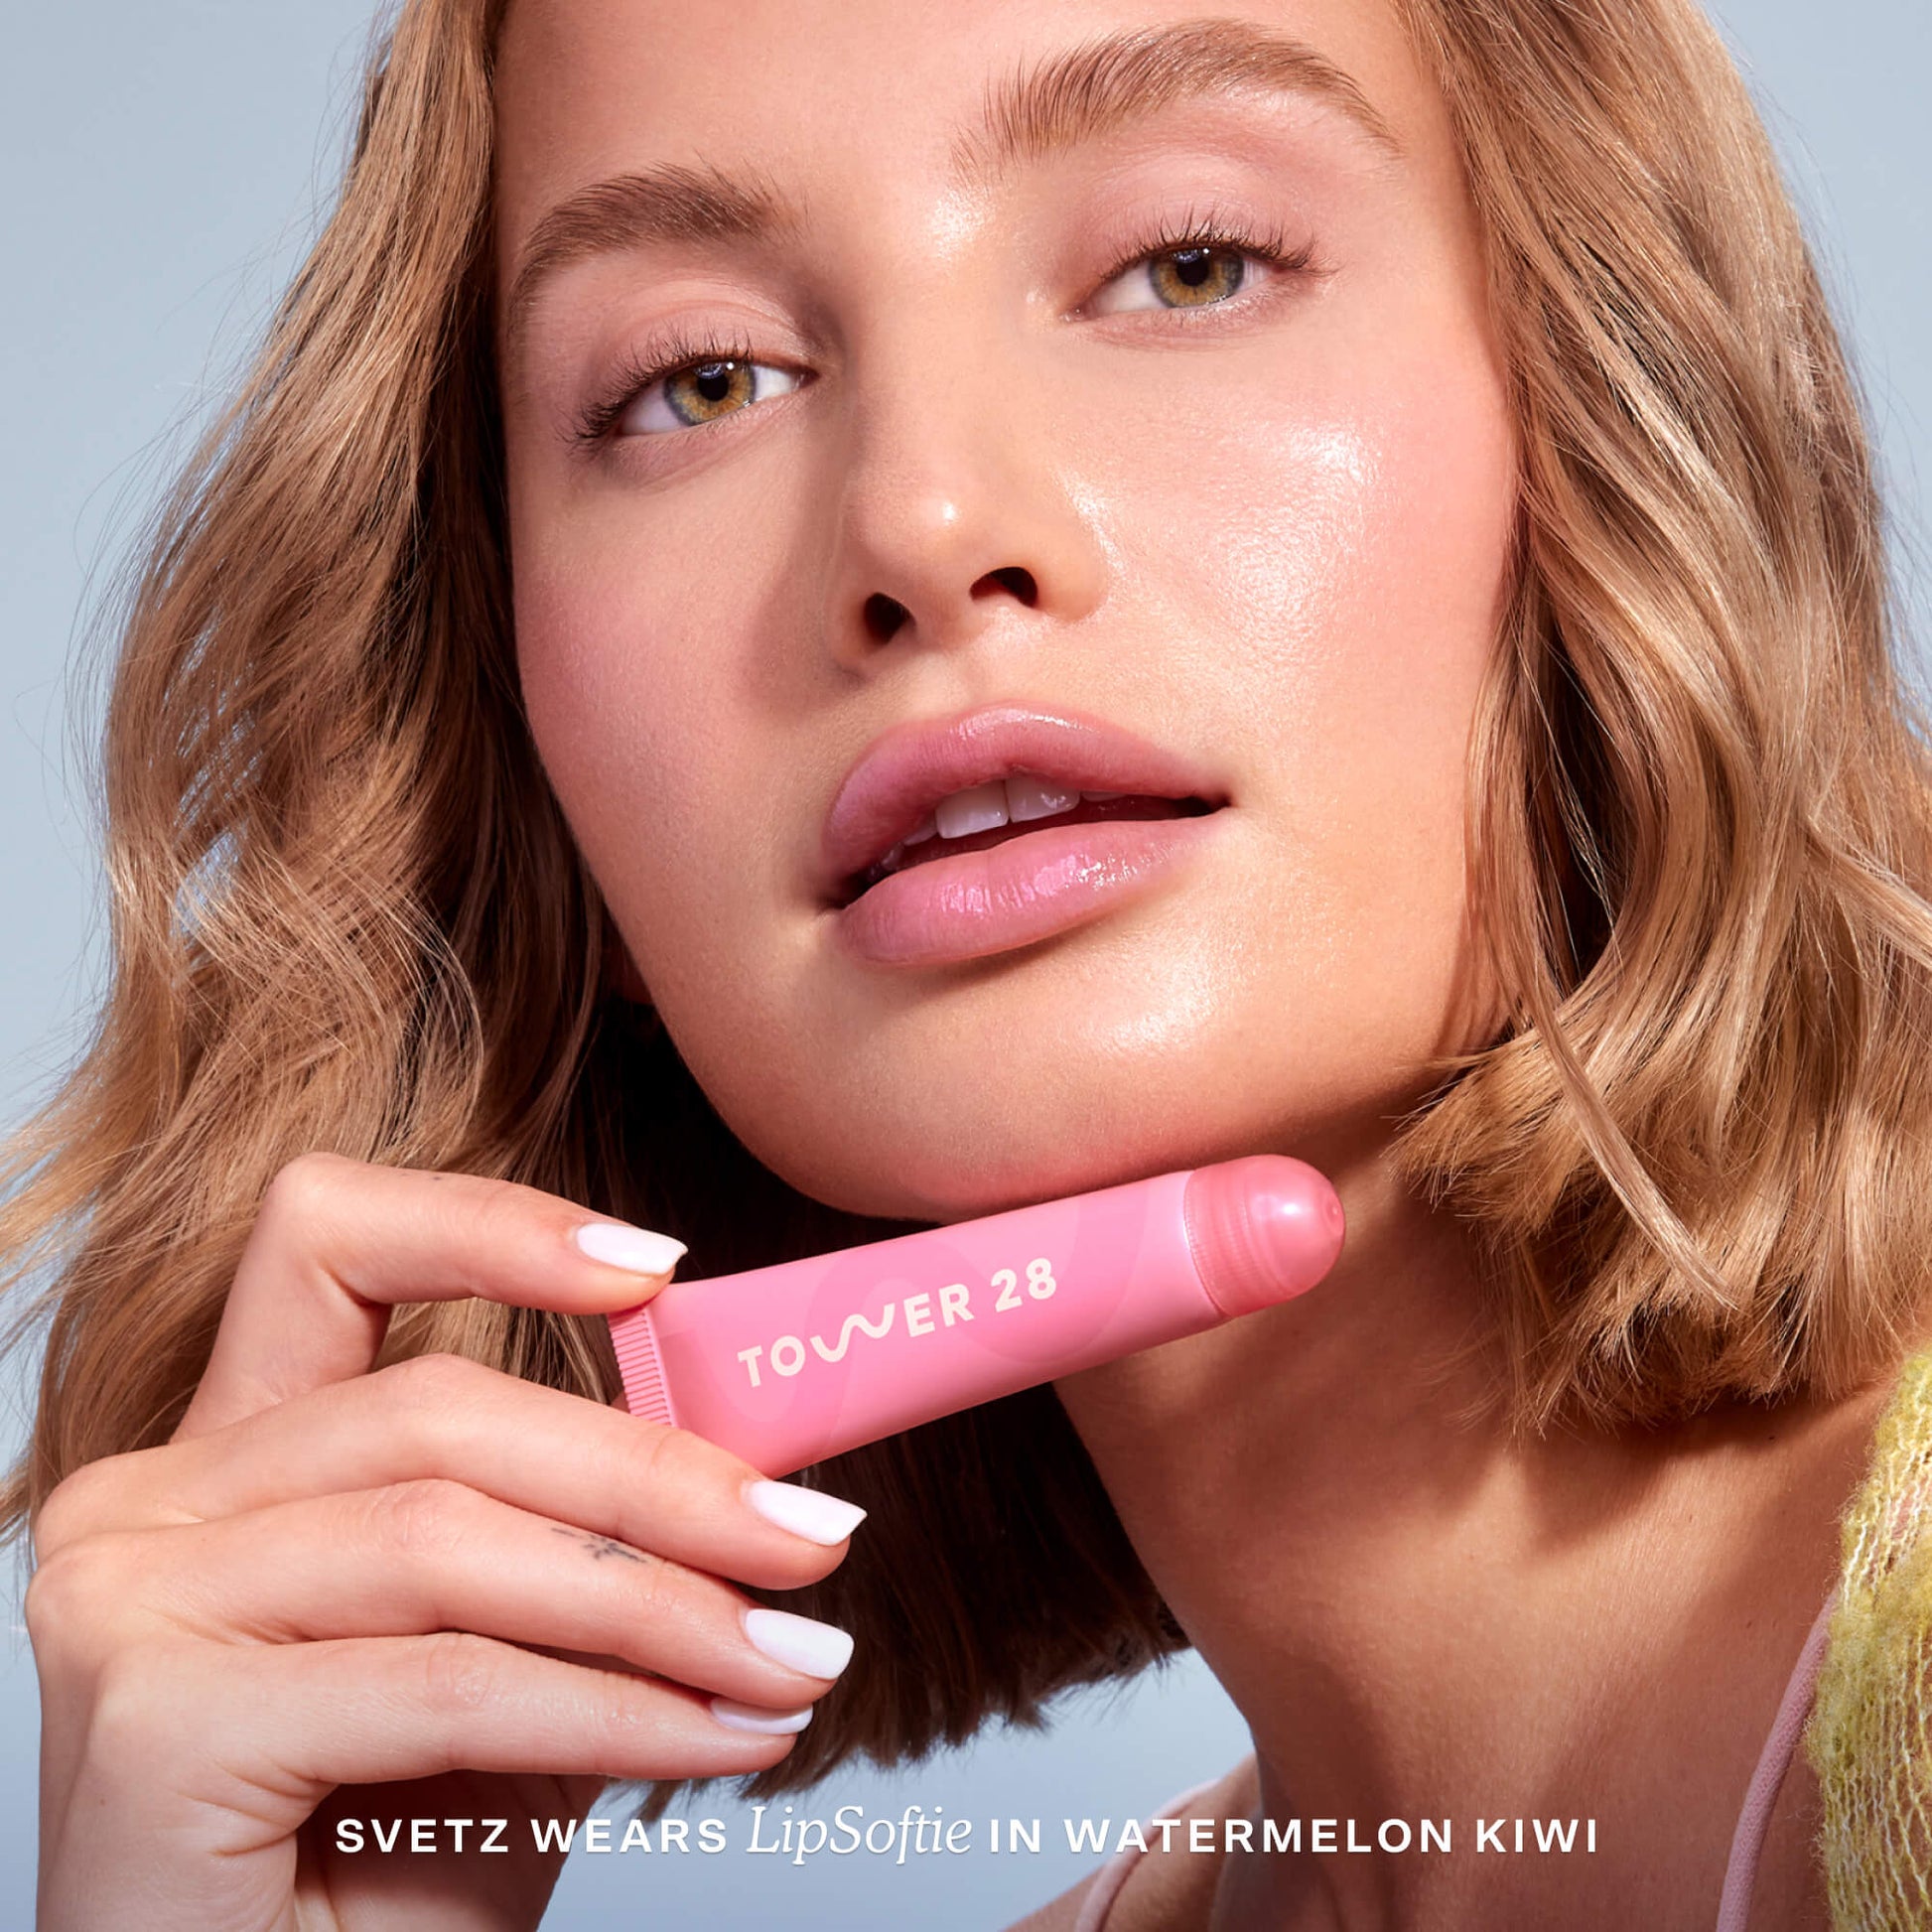 [Shared: A close up of a model holding Tower 28 Beauty's LipSoftie™ Lip Treatment in Watermelon Kiwi and wearing it on her lips